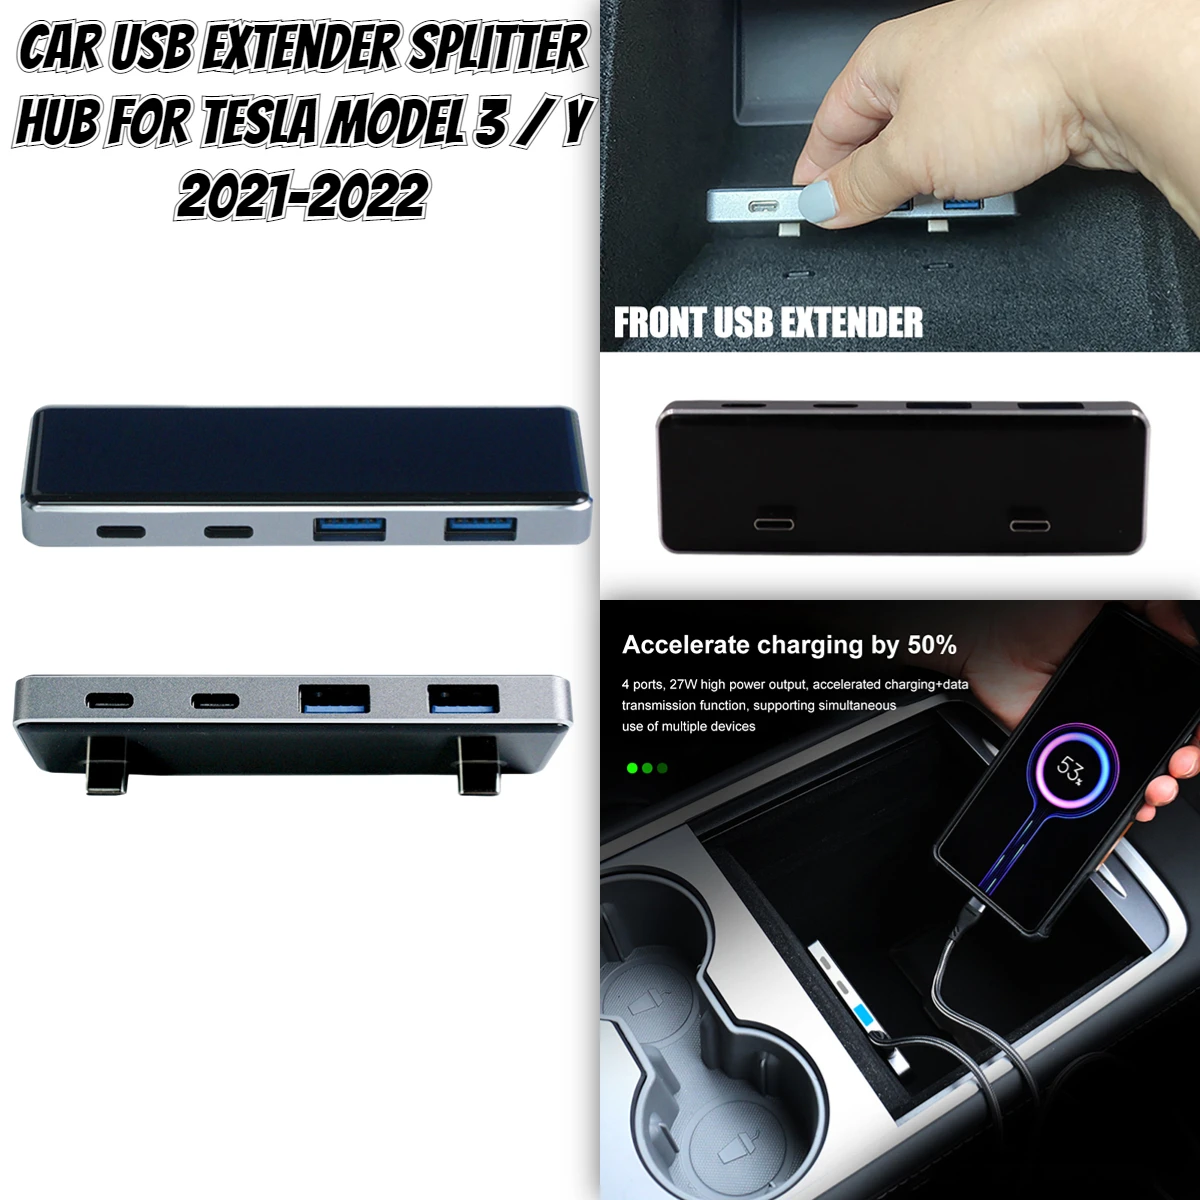 

For Tesla Model 3/Y 2021-2022 Car Accessories Rear USB Extender Center Console 4 Ports USB Splitter Hub Conversion Head Charger